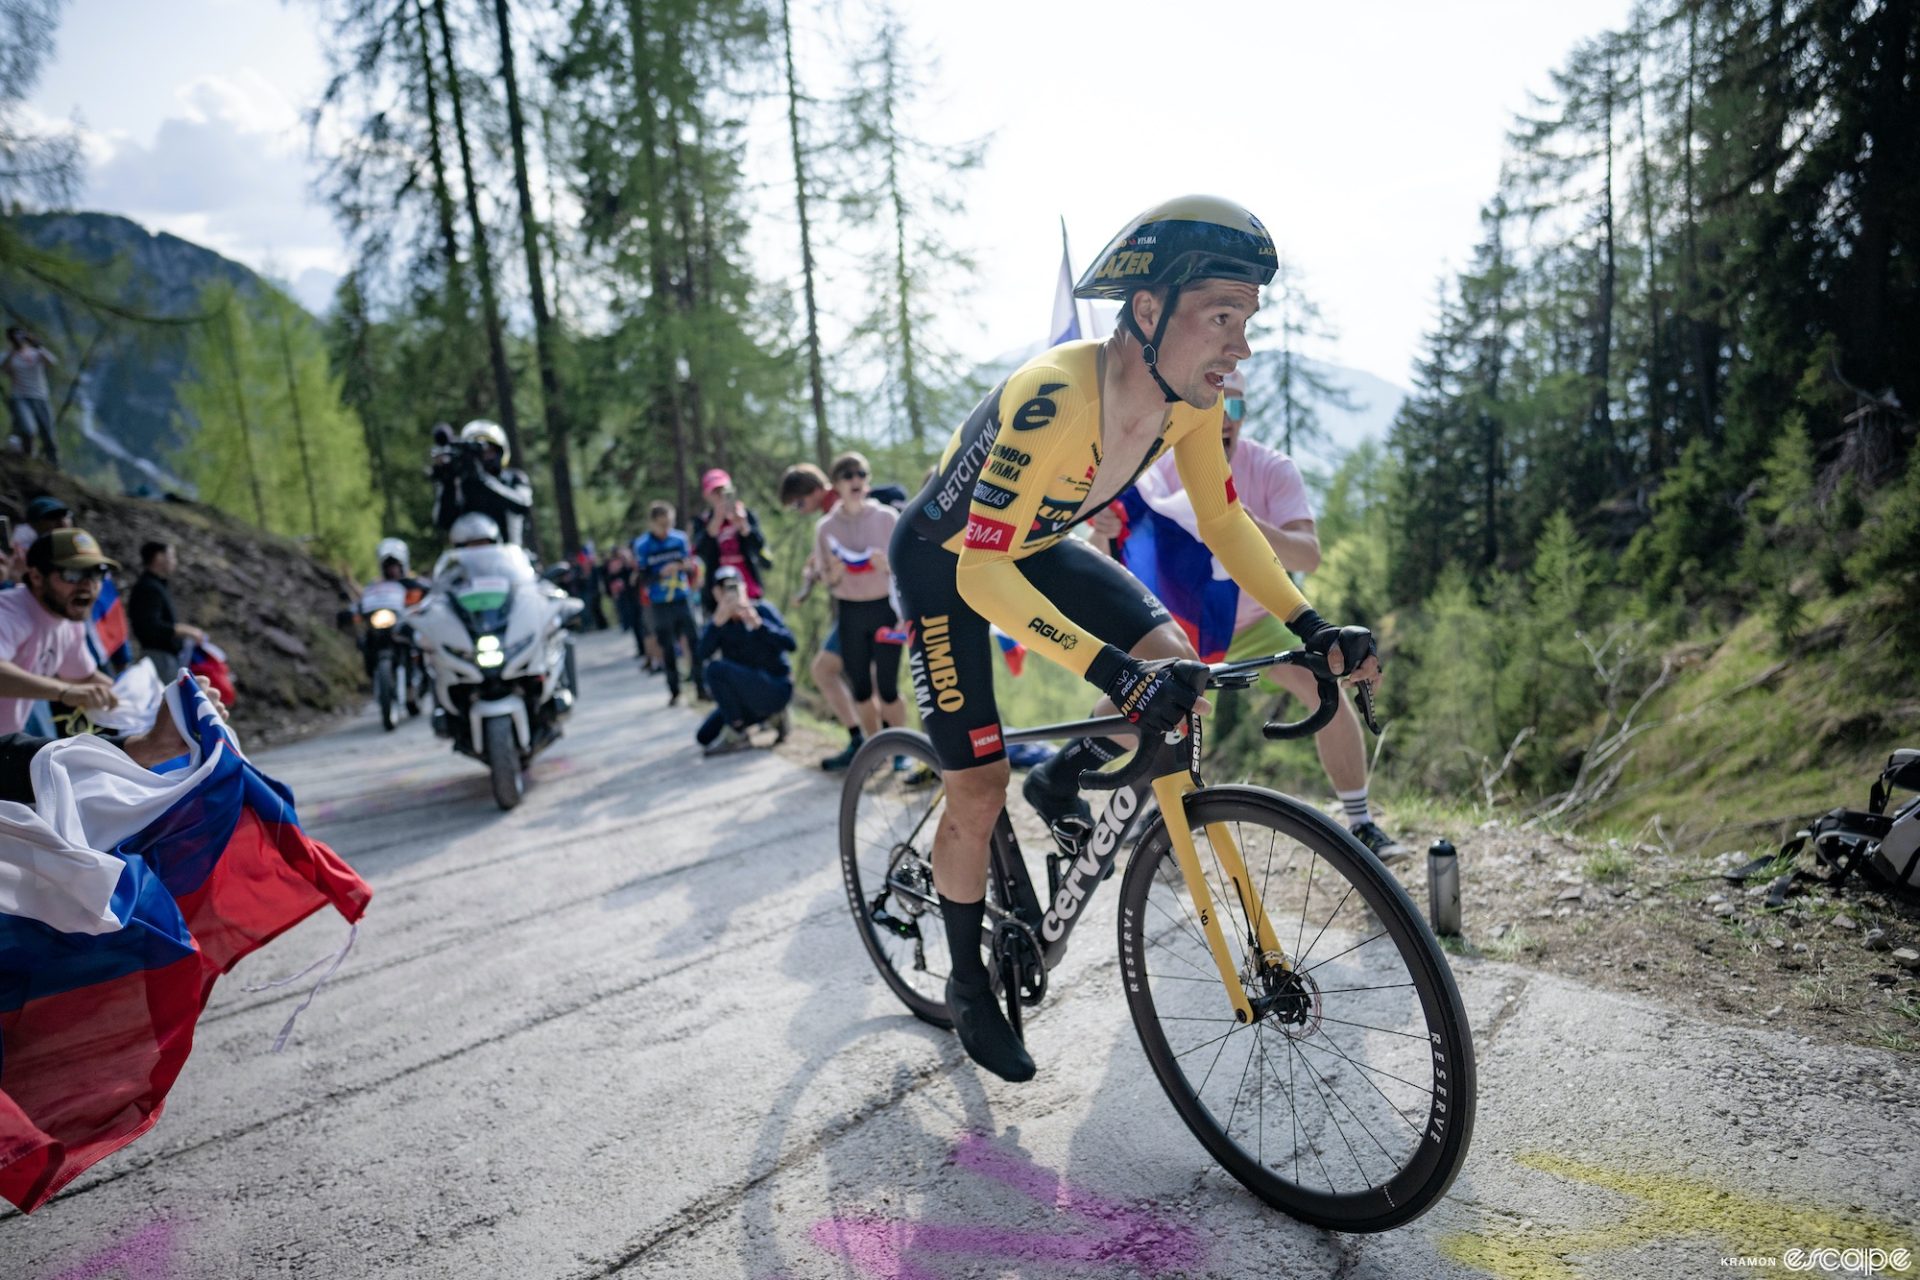 Primož Roglič climbs Monte Lussari in the stage 20 time trial at the Giro d'Italia. He's on a section of road so deep it has traction cuts in the pavement, and fans are waving the Slovenian flag at him.